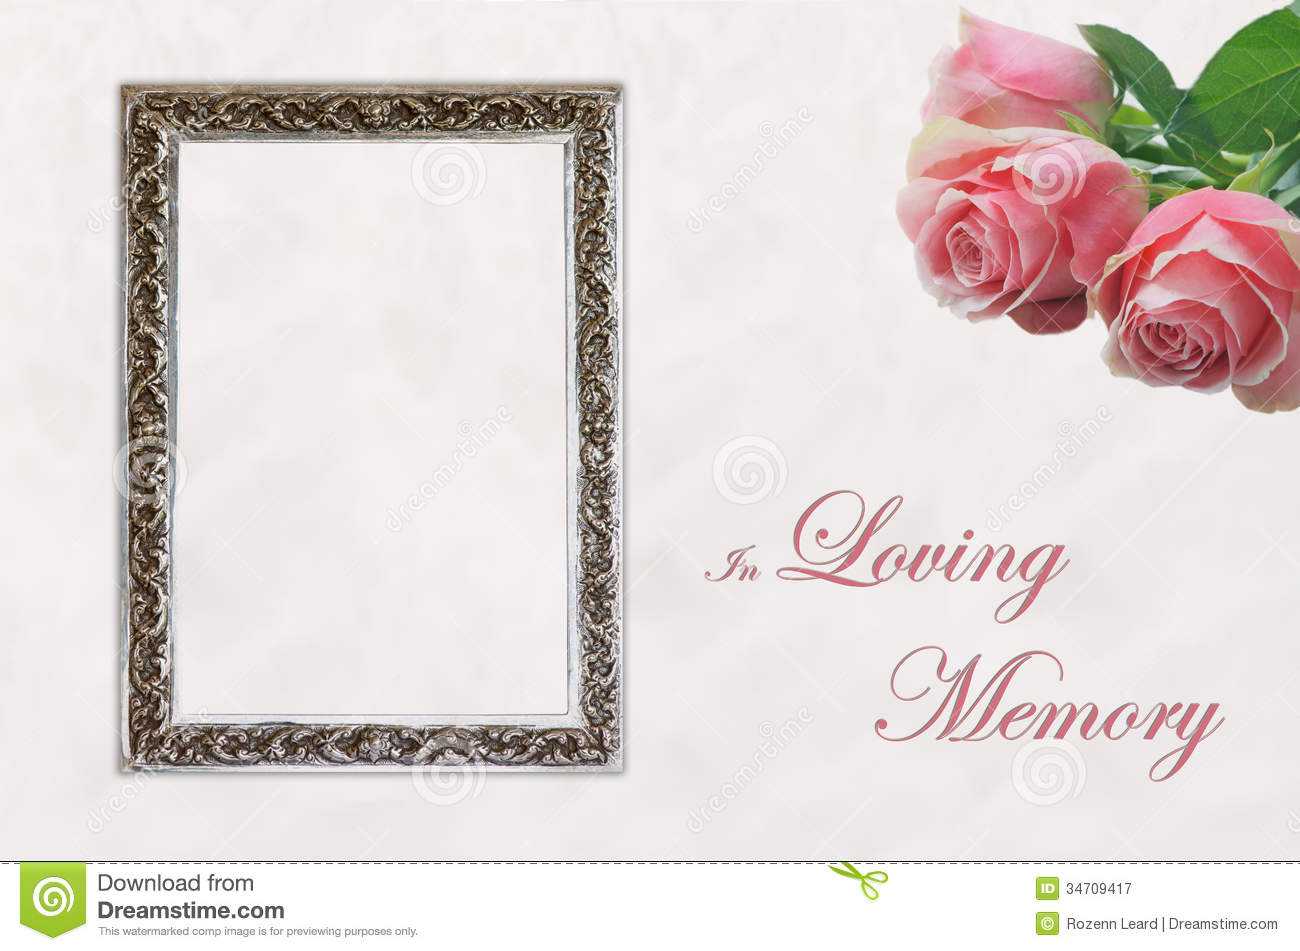 In Memory Cards Templates ] – 21 Obituary Card Templates Throughout In Memory Cards Templates